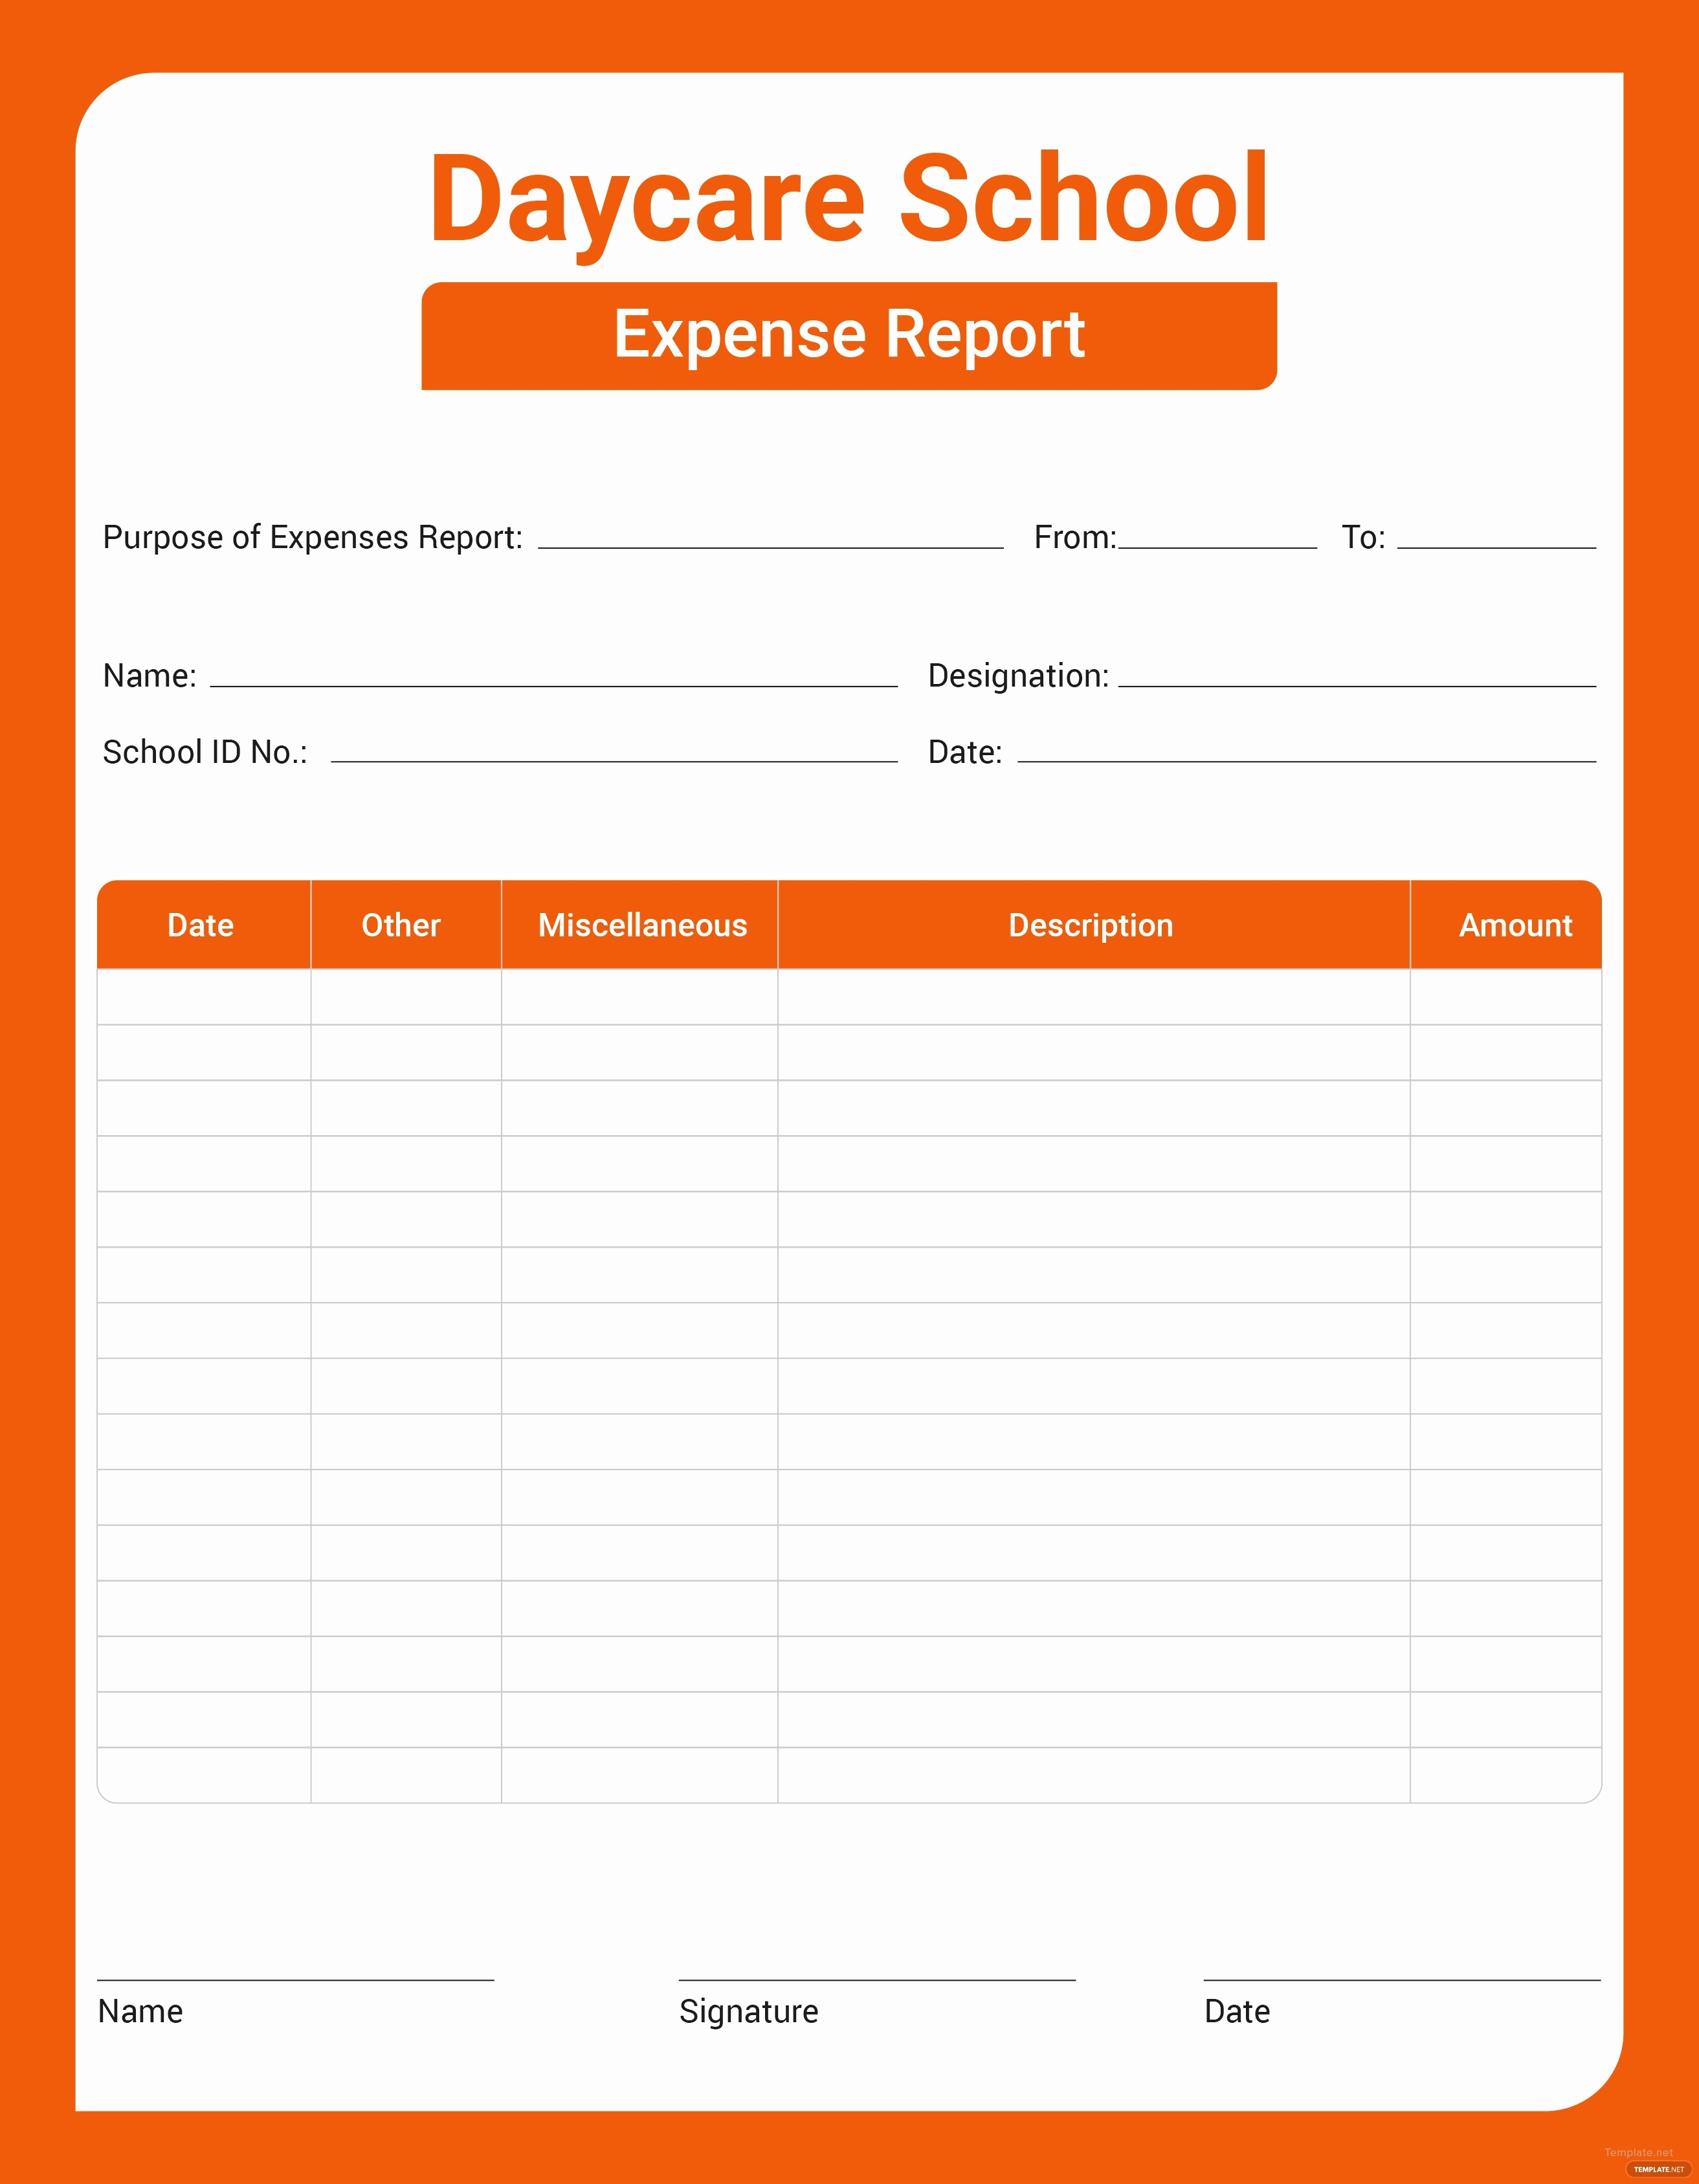 Expense Report Template for Numbers Awesome Free Daycare Expense Report Template In Microsoft Word